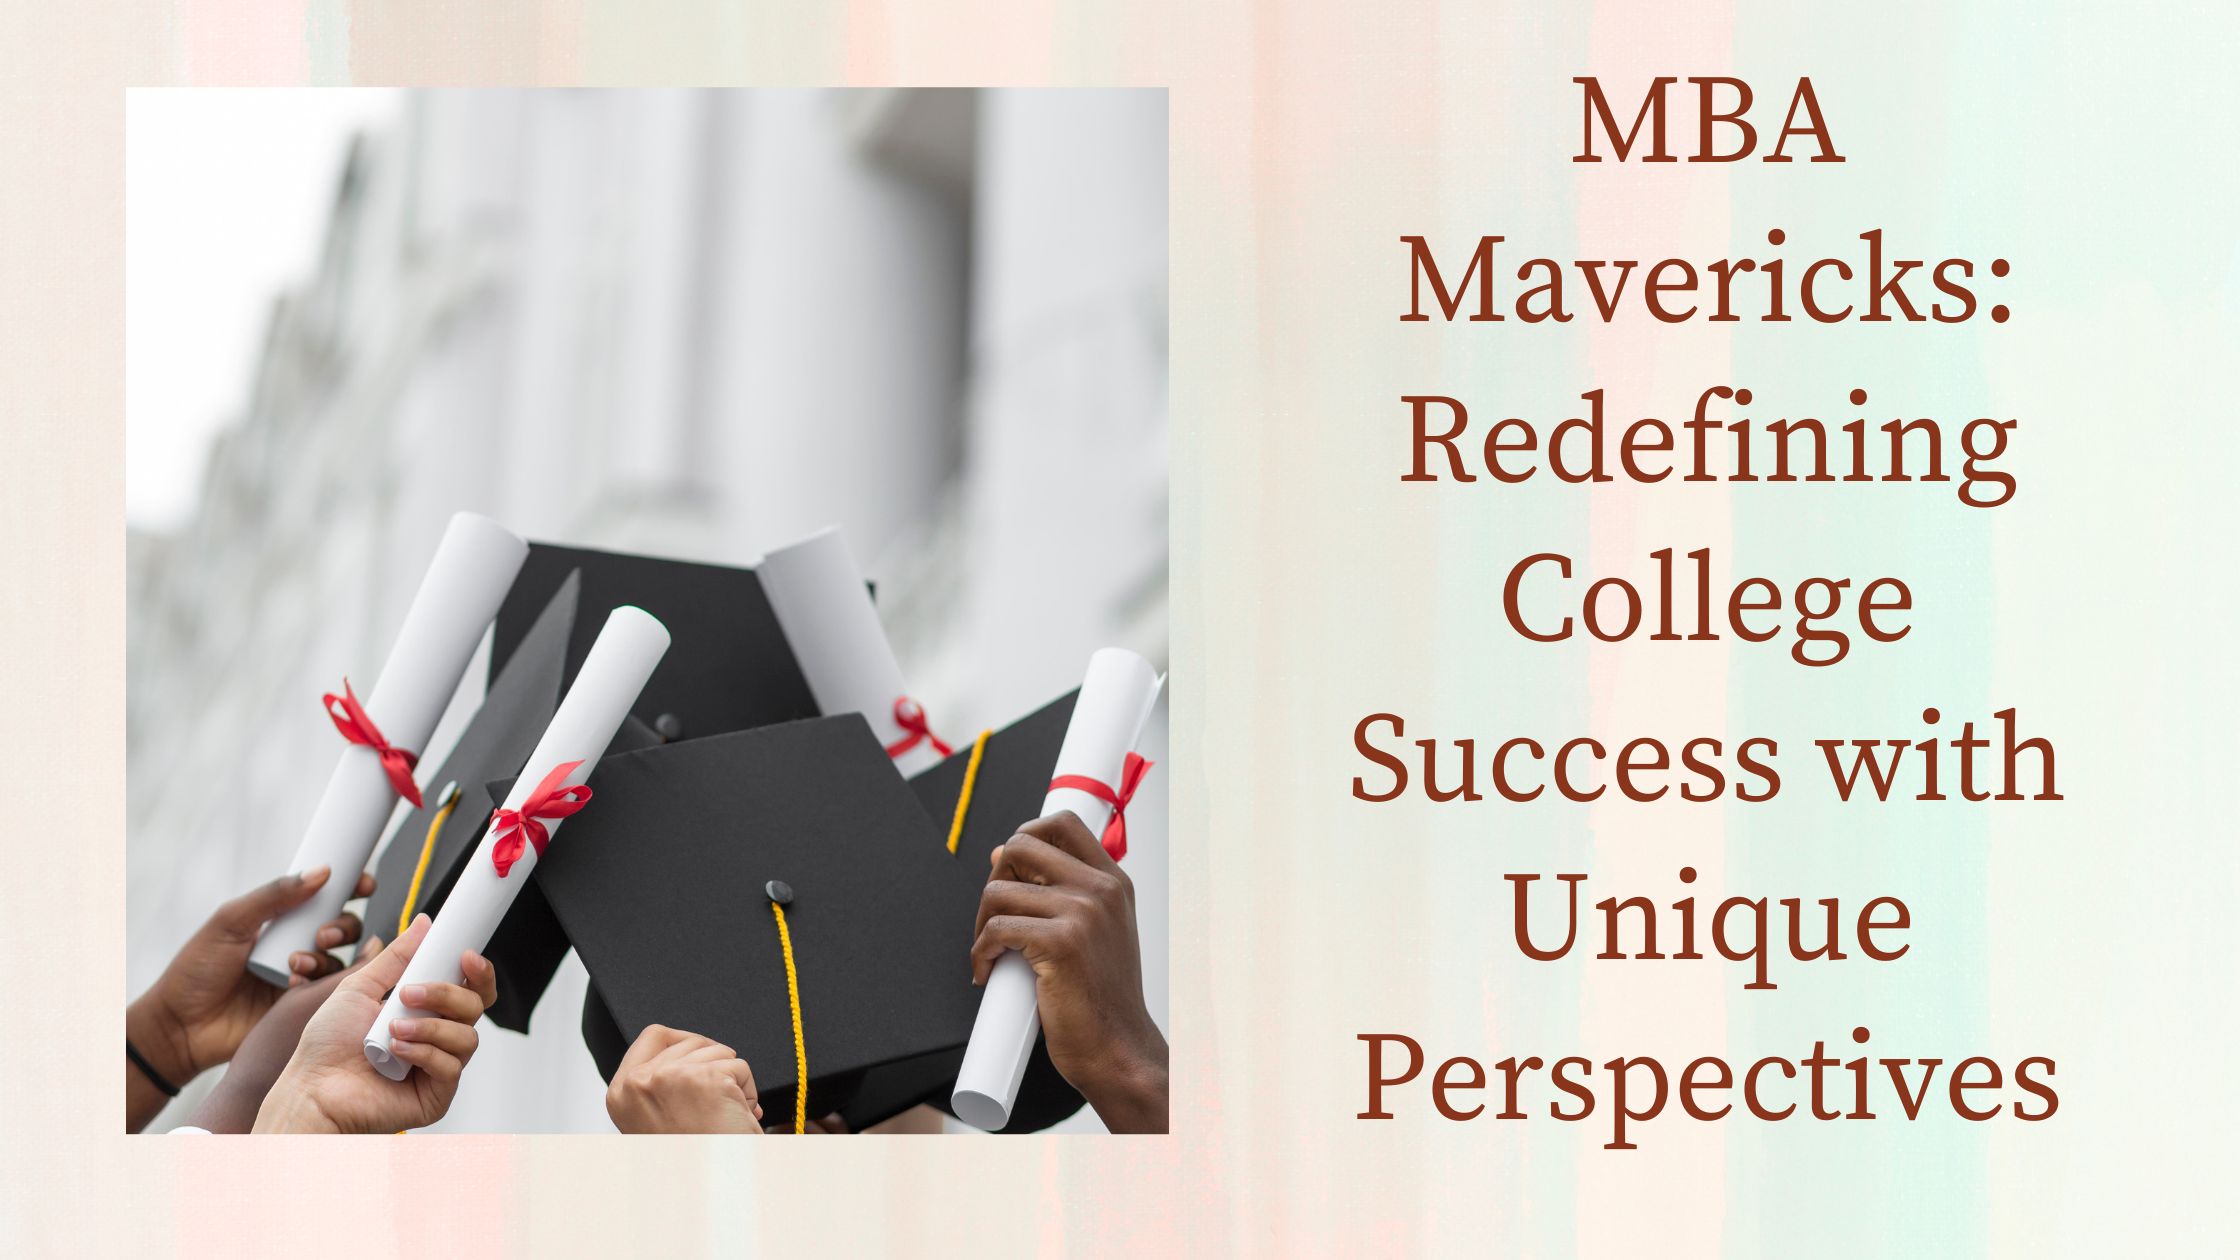 MBA Mavericks: Redefining College Success with Unique Perspectives